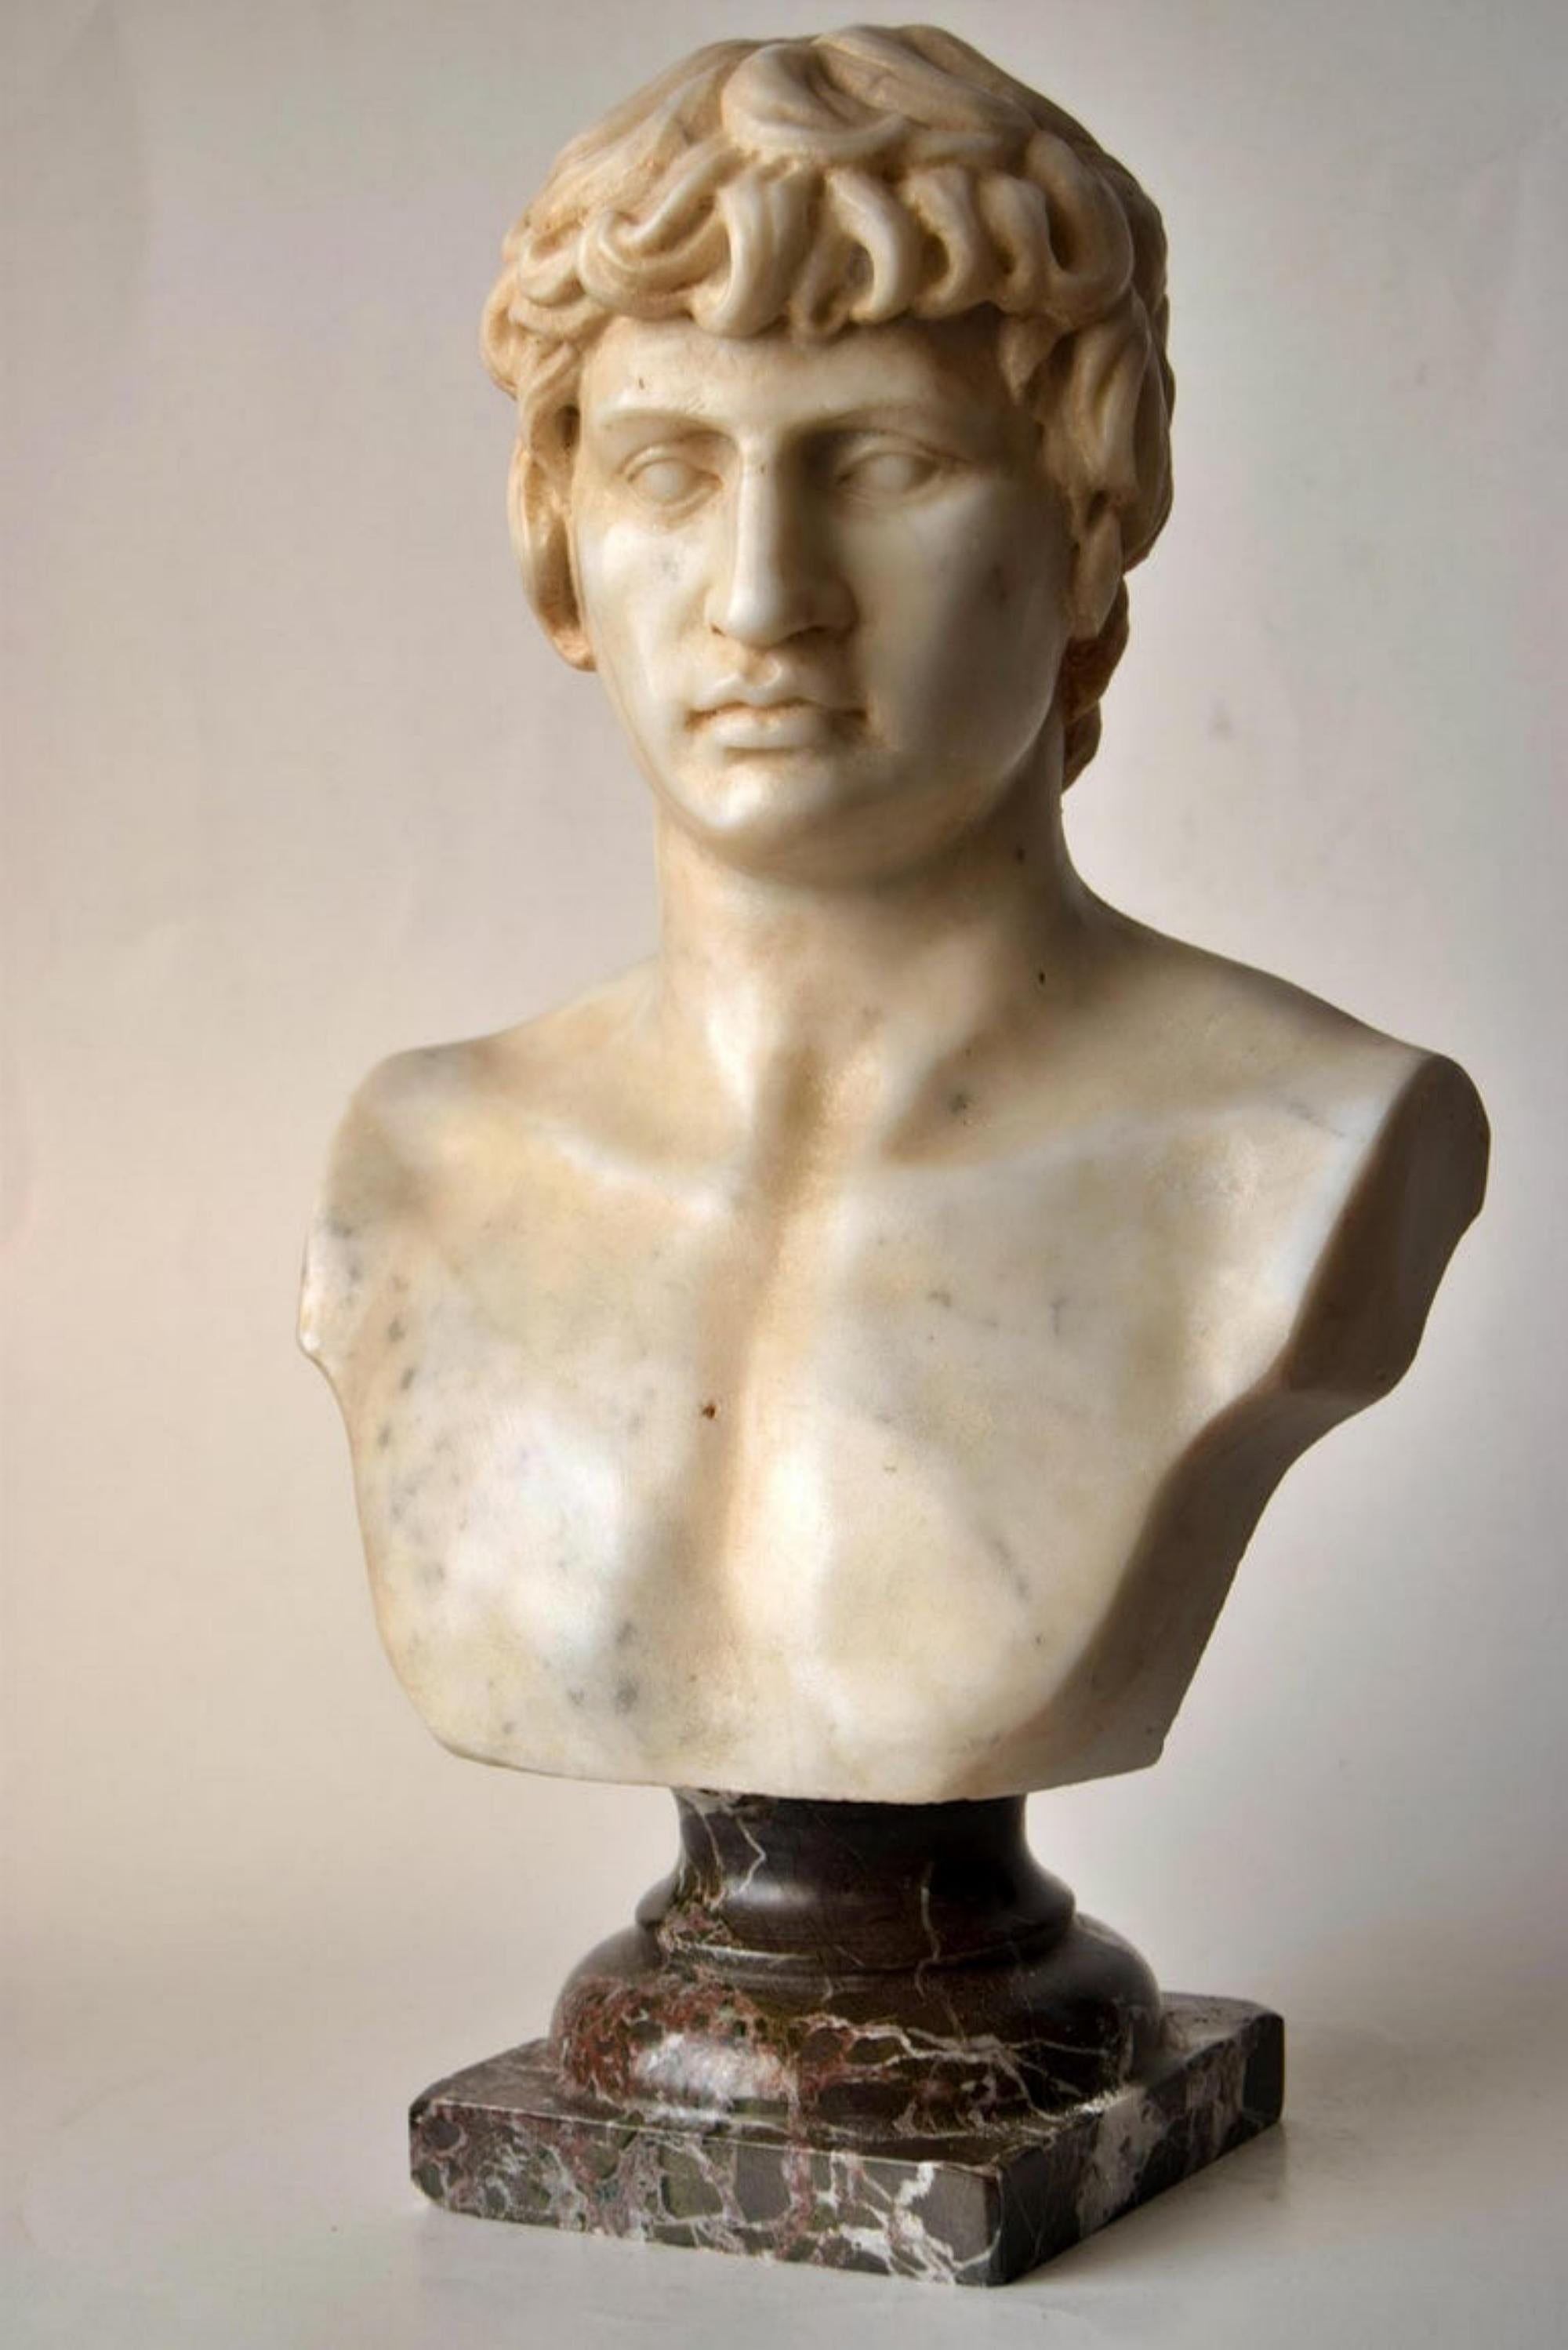 Bust of antinous carved on white Carrara marble early 20th century.
Placed on a turned base in red Levanzo marble.
Measures: 35 x 20 x 12cm.
Perfect condition for the age.